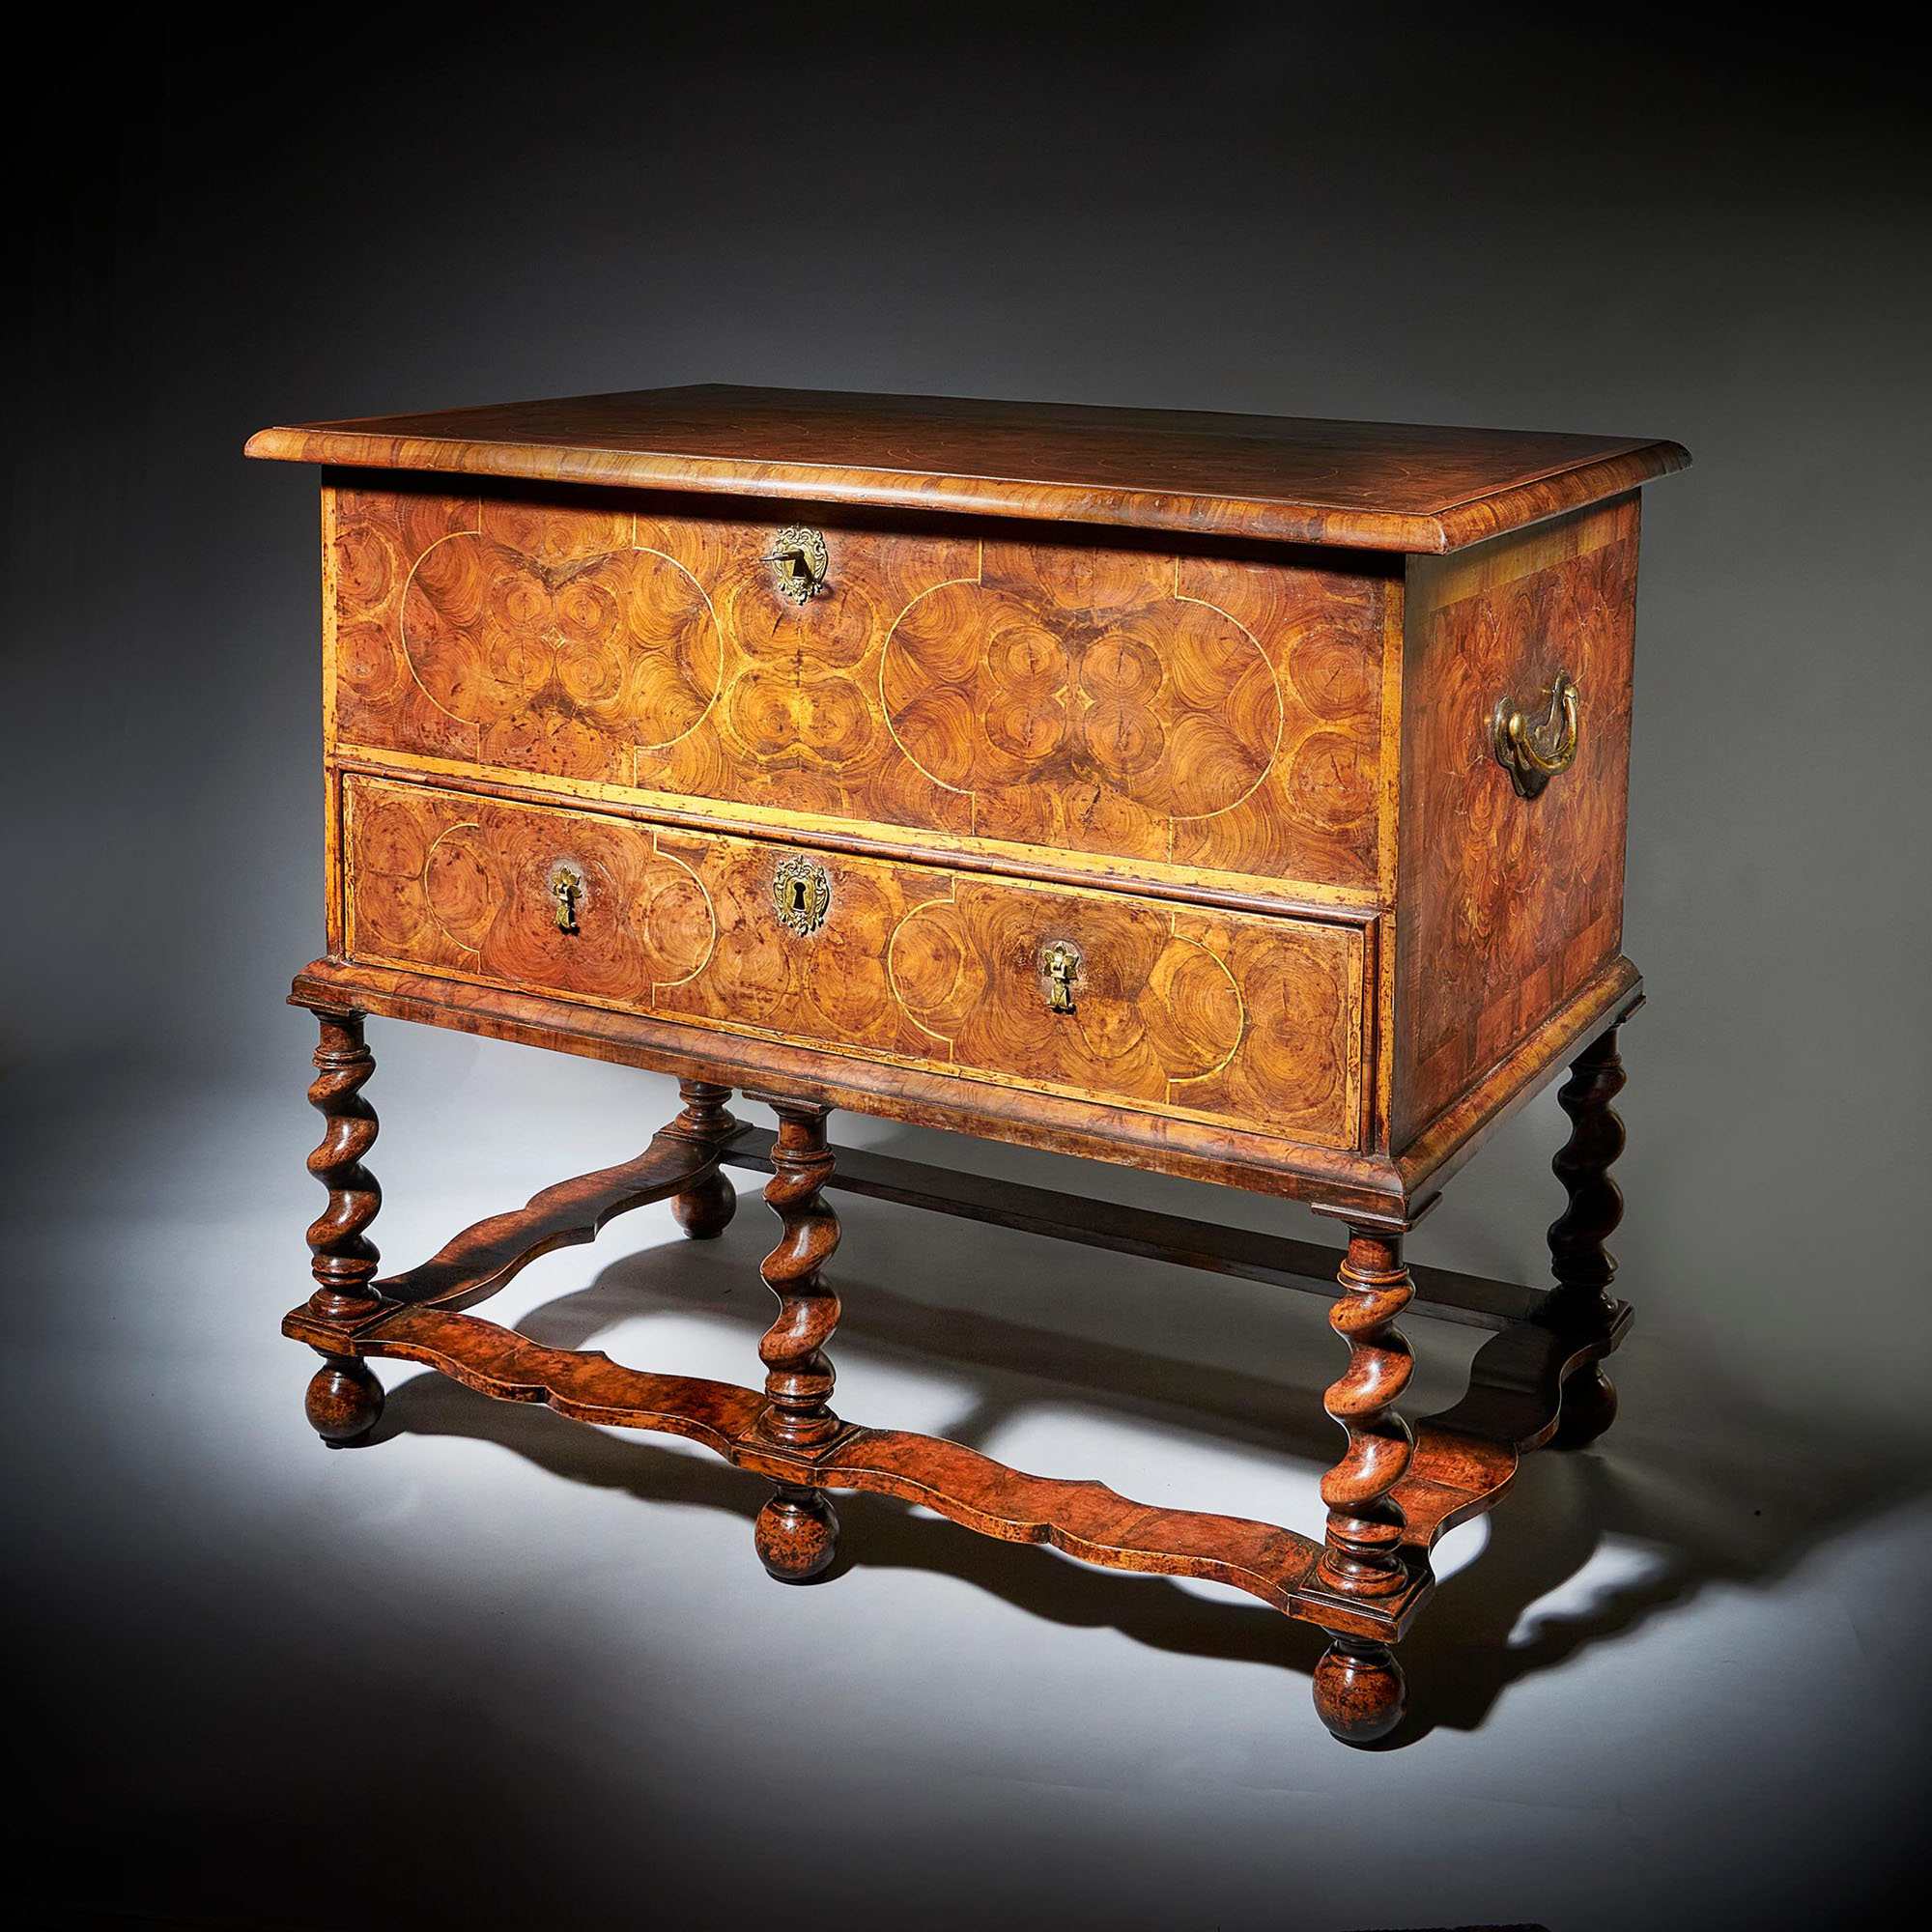 A fine and extremely rare 17th century William and Mary baroque olive oyster chest on stand or 'table box', circa 1675-1690. 16